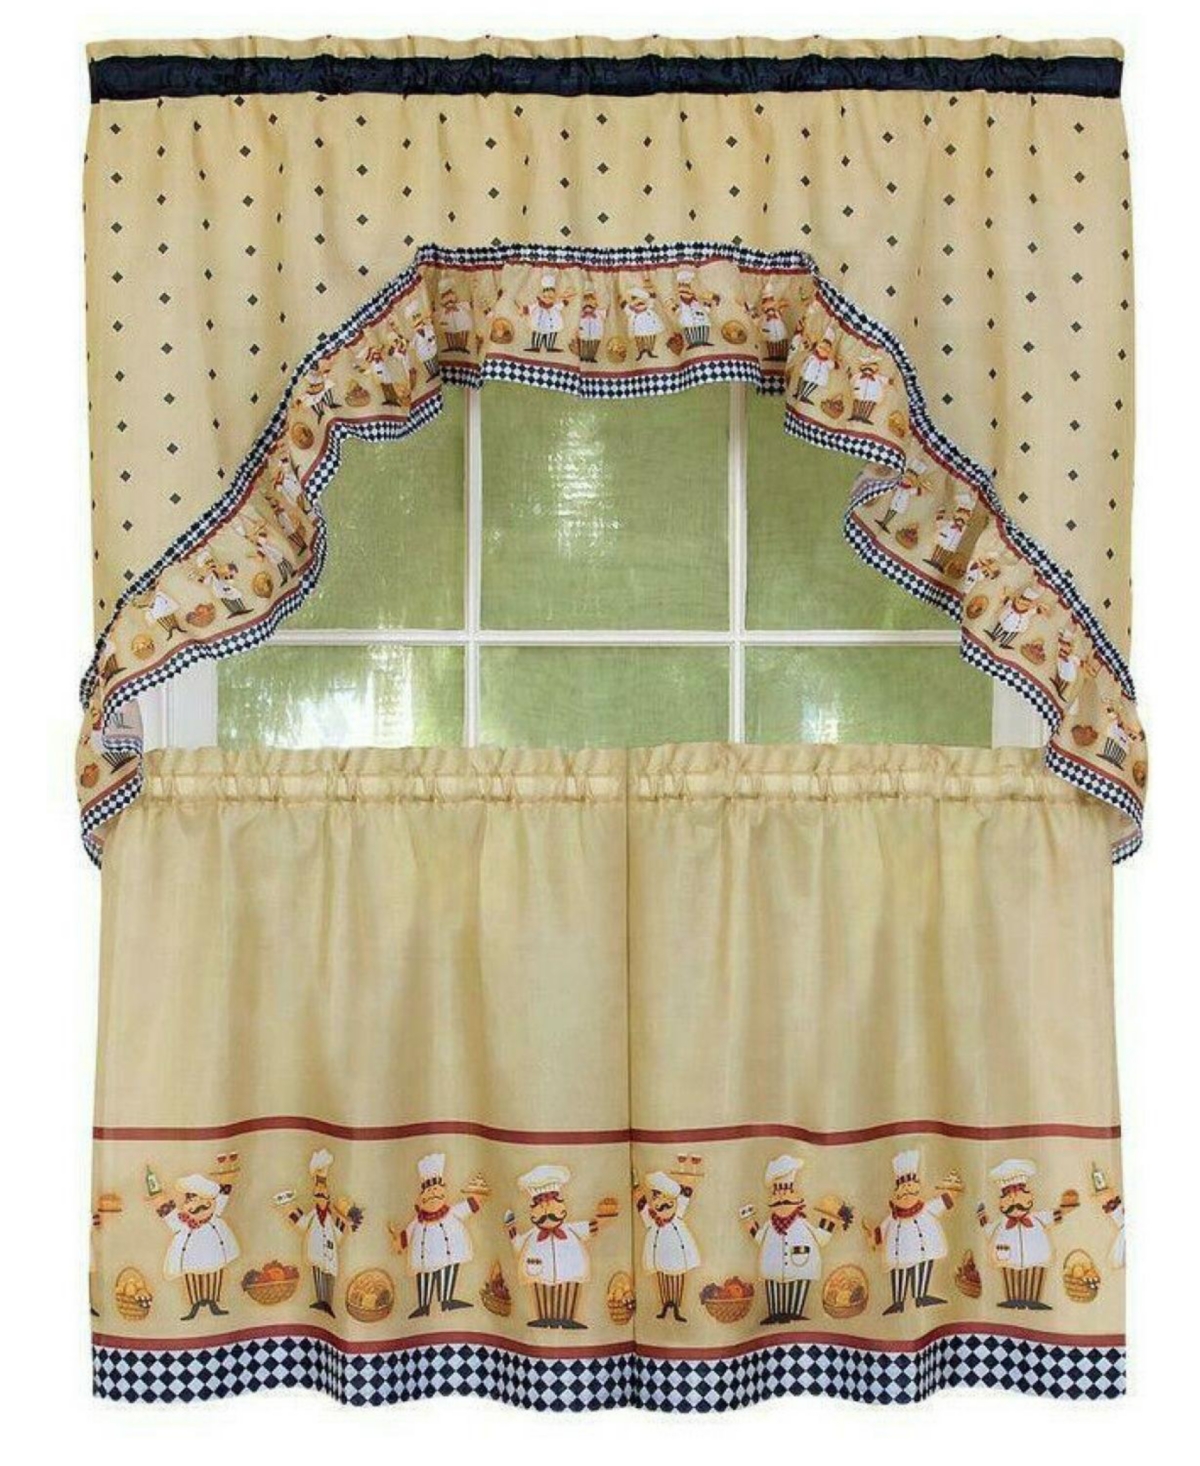 Fat Chef Cucina Rod Pocket Cafe Kitchen Curtain Tier and Swag Valance Set - Beige